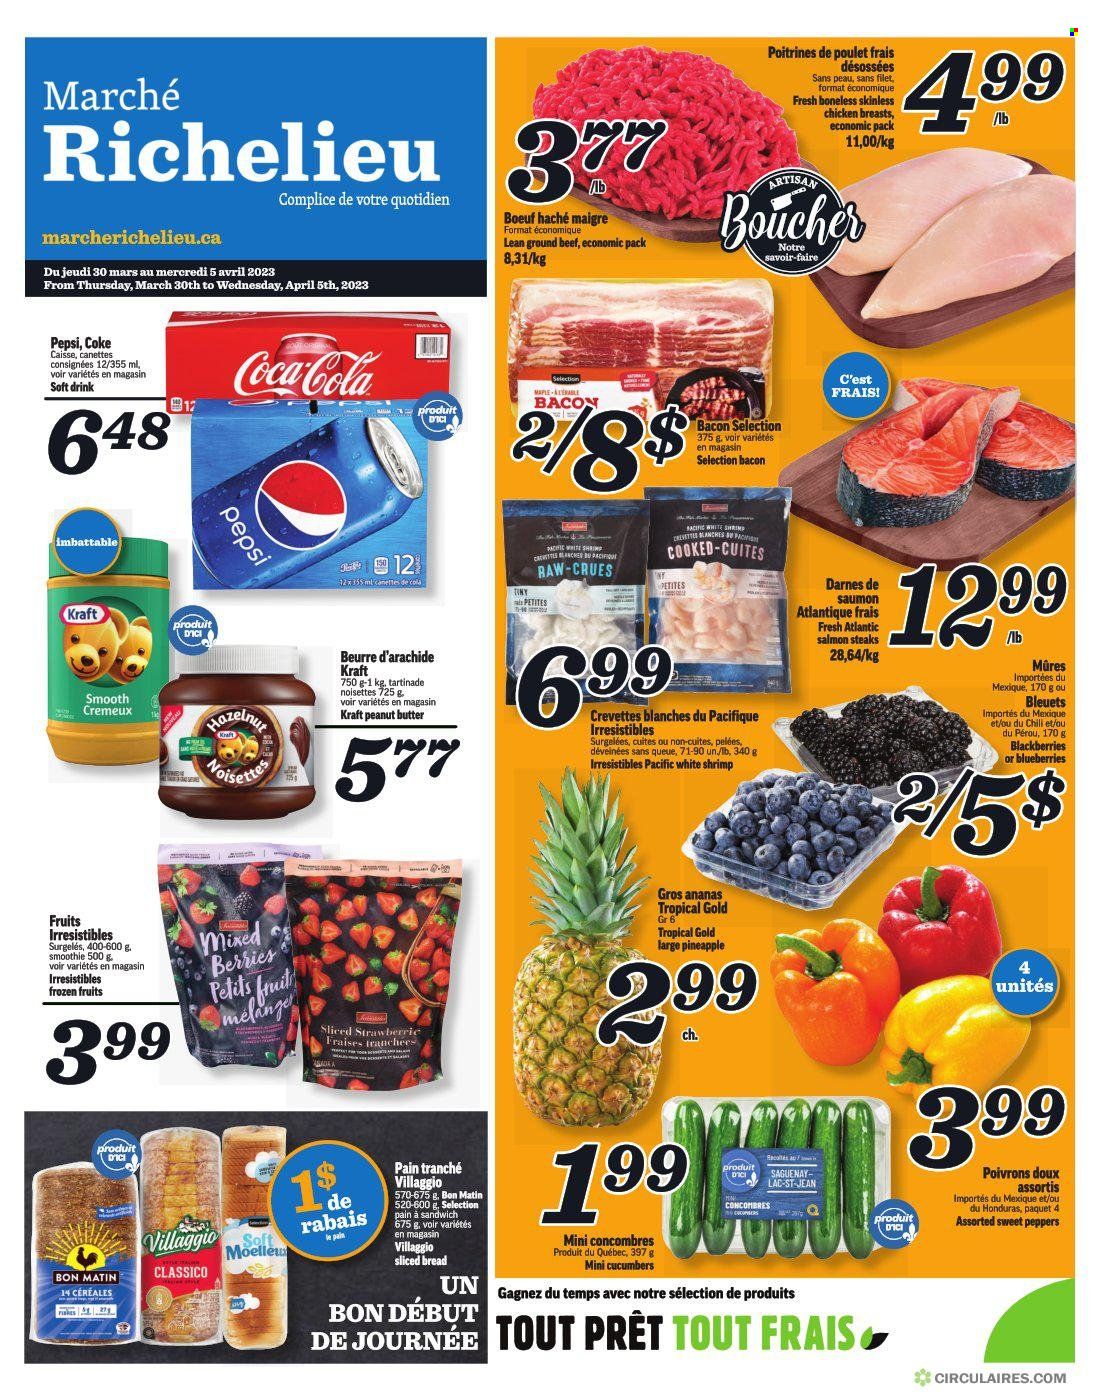 thumbnail - Marché Richelieu Flyer - March 30, 2023 - April 05, 2023 - Sales products - bread, cucumber, sweet peppers, peppers, blackberries, blueberries, pineapple, salmon, shrimps, sandwich, Kraft®, bacon, Mars, Classico, peanut butter, Coca-Cola, Pepsi, soft drink, Coke, smoothie, Richelieu, chicken breasts, chicken, beef meat, ground beef, steak. Page 1.